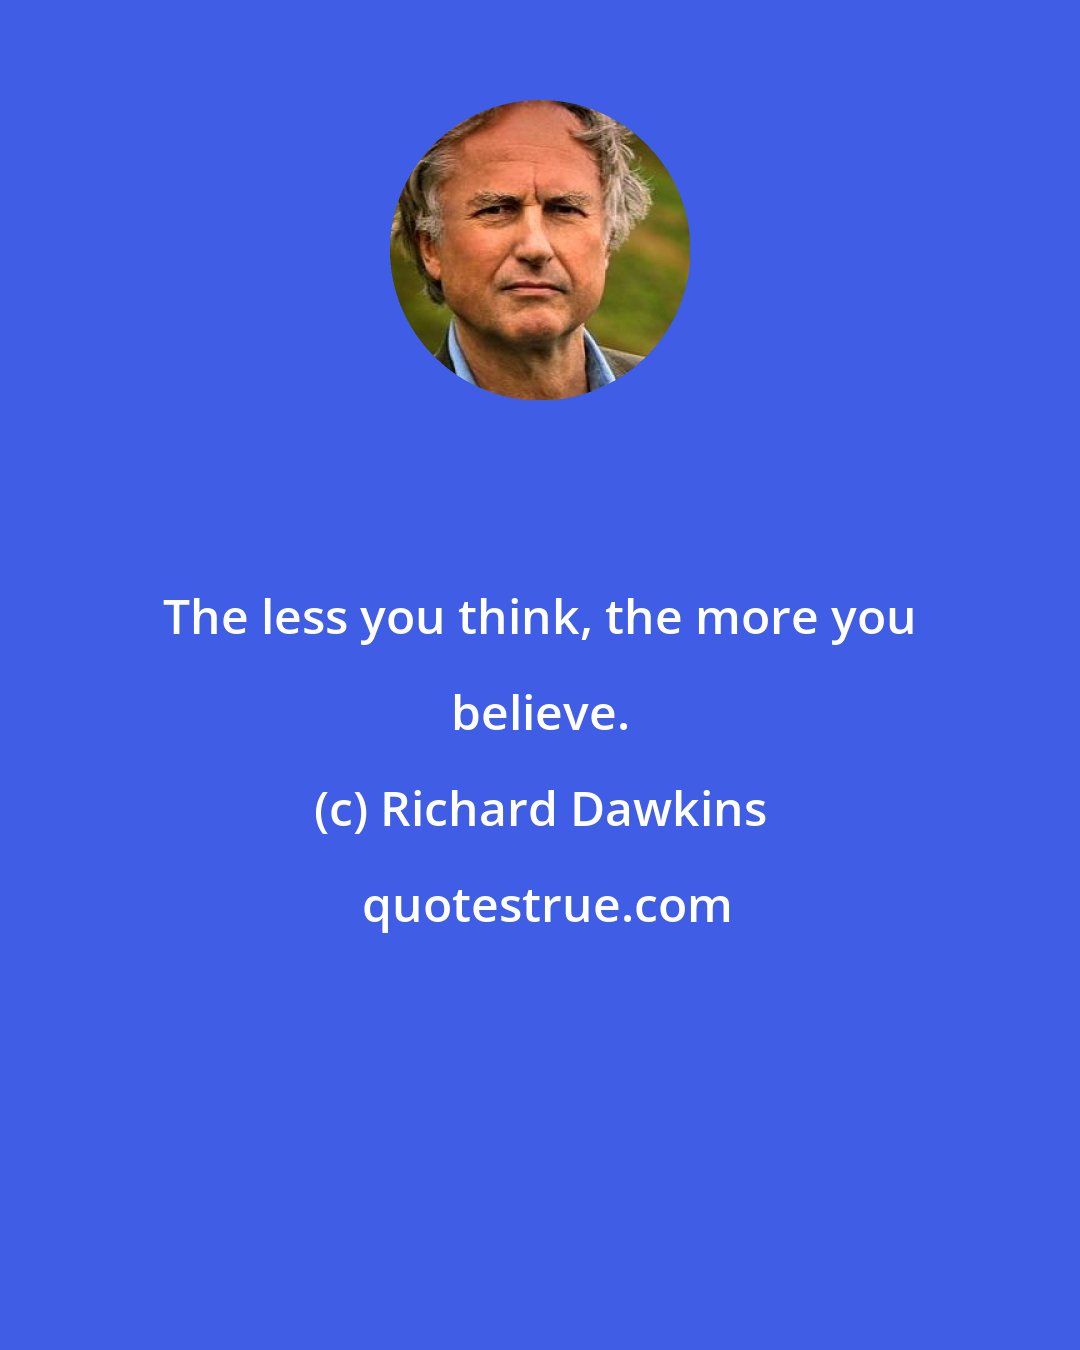 Richard Dawkins: The less you think, the more you believe.